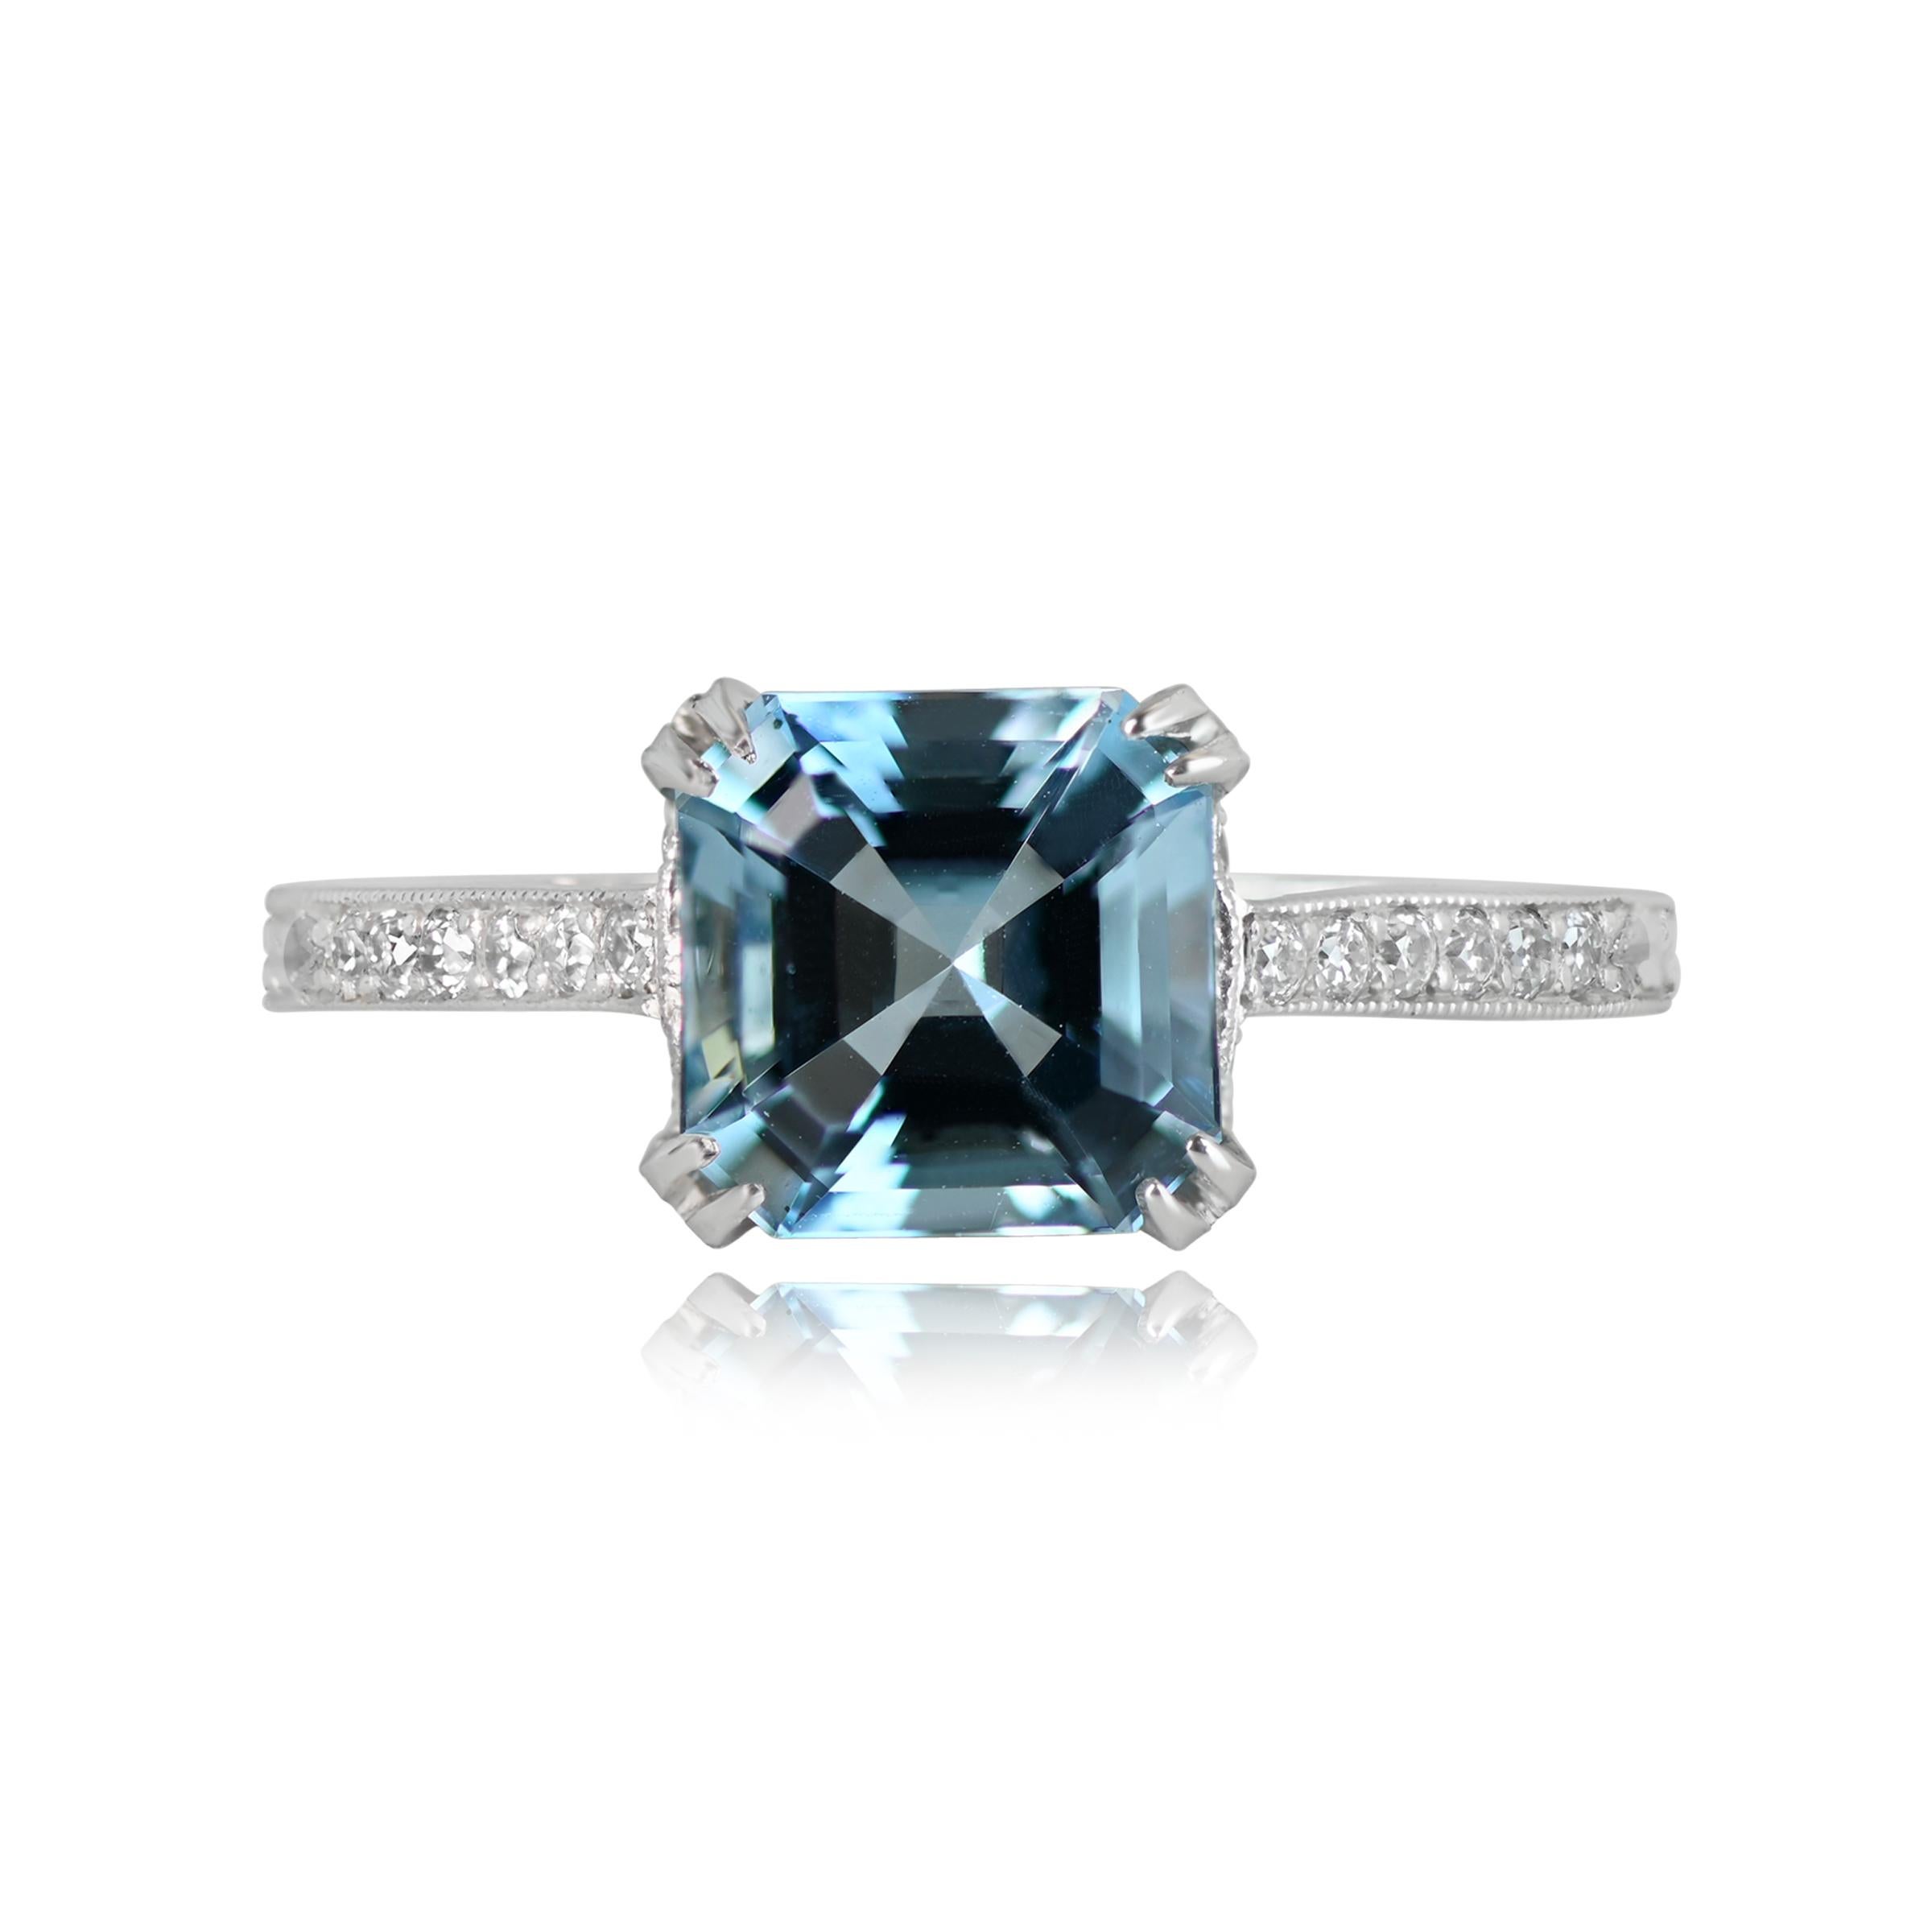 This stunning aquamarine engagement ring showcases a lively 1.39-carat Asscher cut aquamarine in a beautiful platinum and diamond setting. The platinum mounting is adorned with round brilliant cut diamonds along the under-gallery and shoulders,